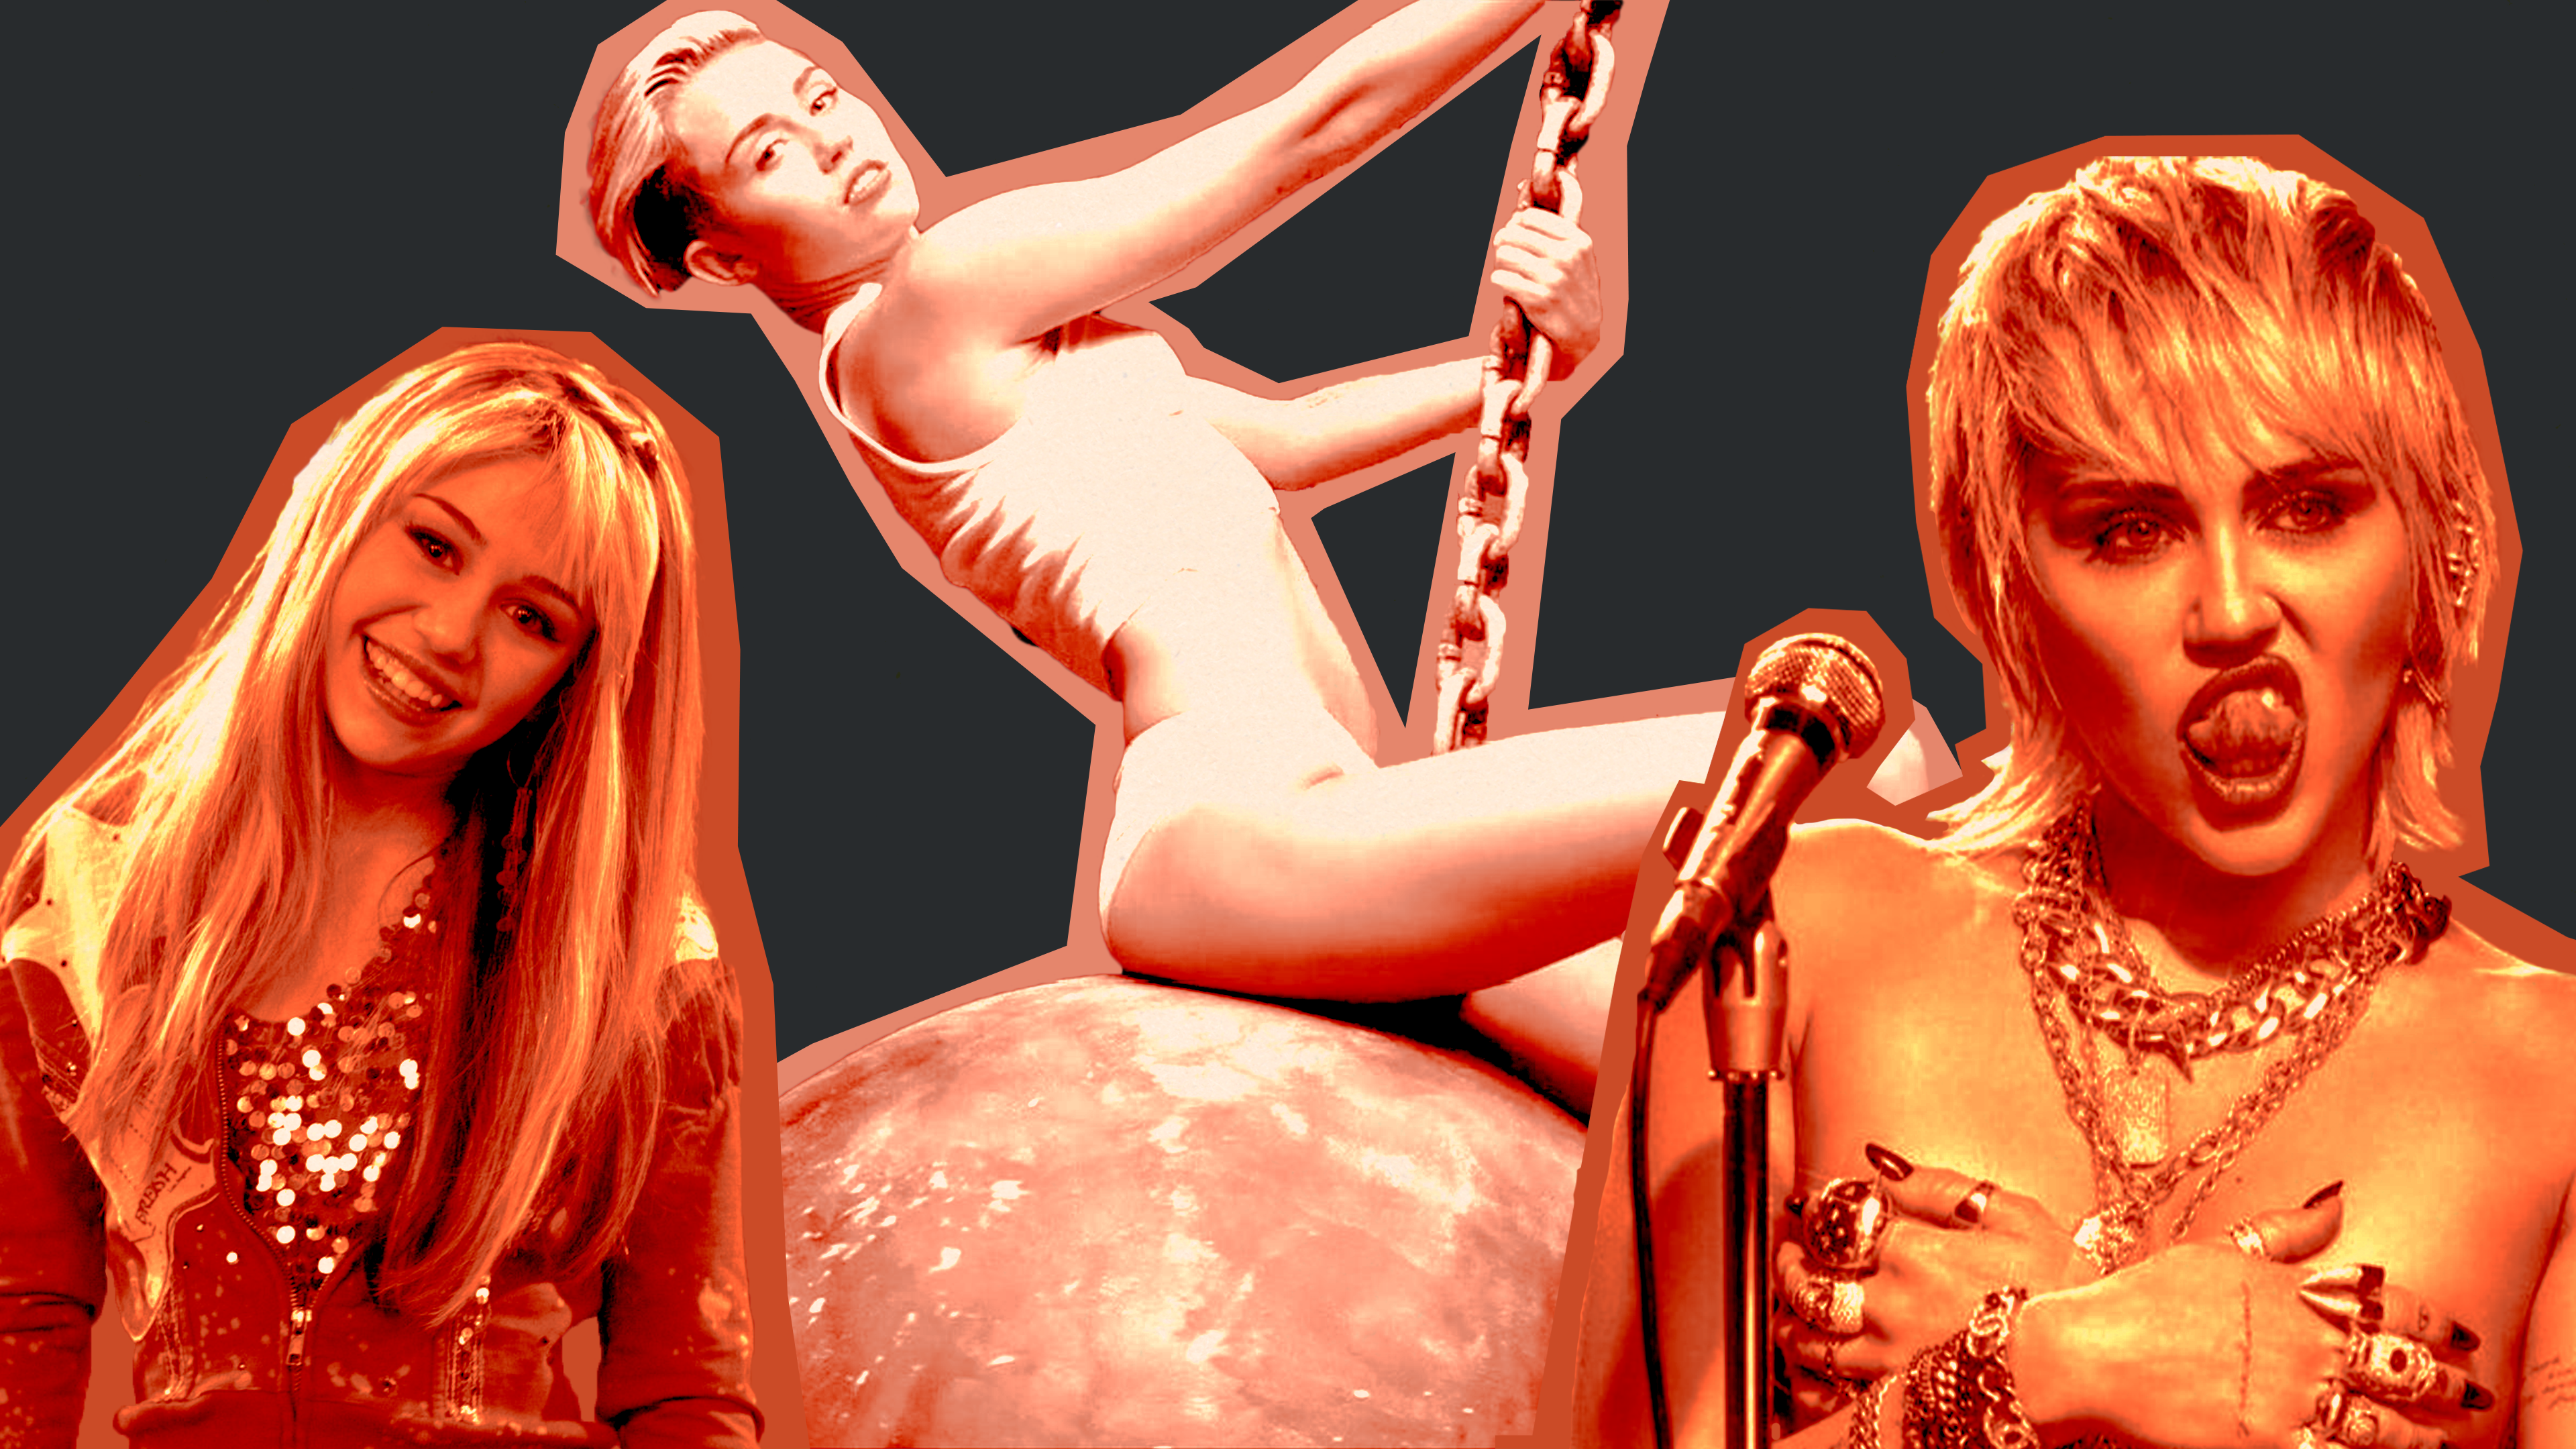 Three versions of Miley Cyrus, as a teen idol, astride a wrecking ball, and sticking her tongue out, overlap in paper cut-outs.